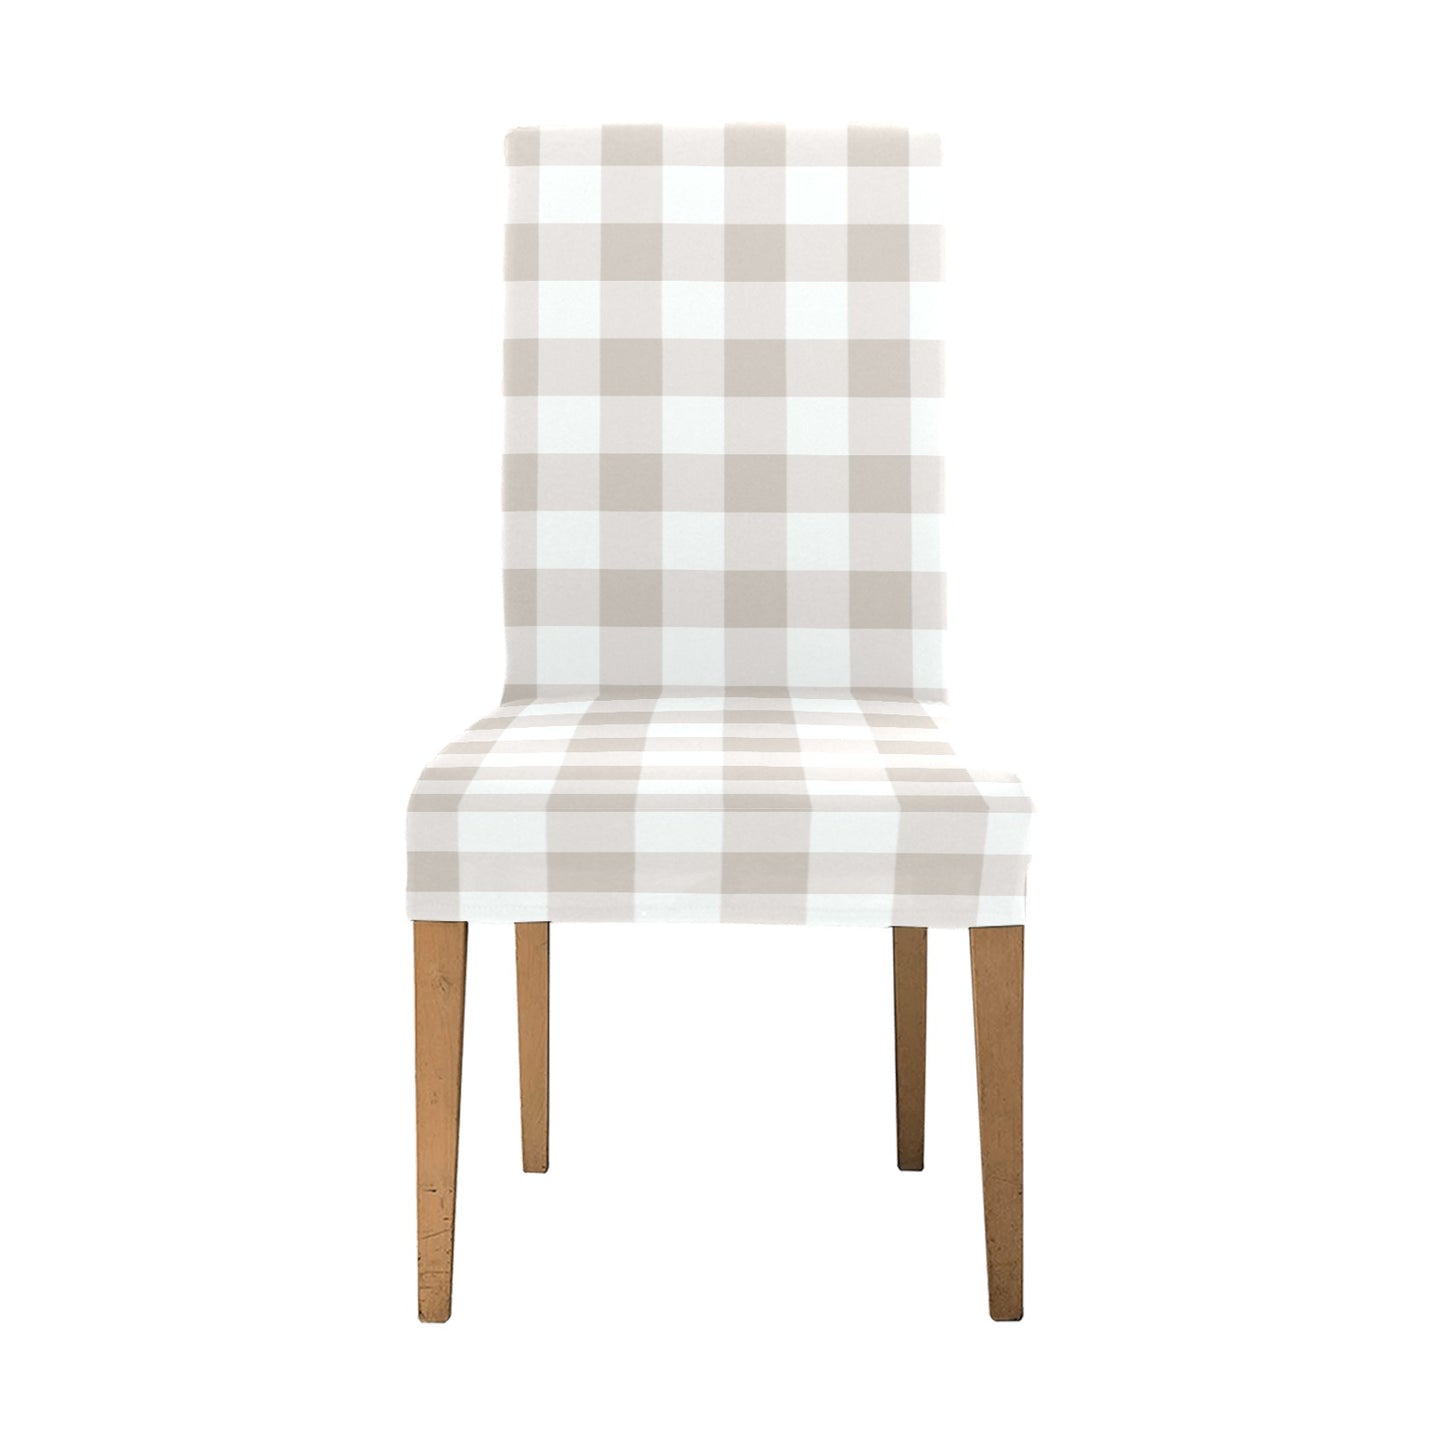 Buffalo Check Dining Chair Seat Covers, Cream Beige Light Brown Plaid Stretch Slipcover Furniture Kitchen Room Home Decor Starcove Fashion